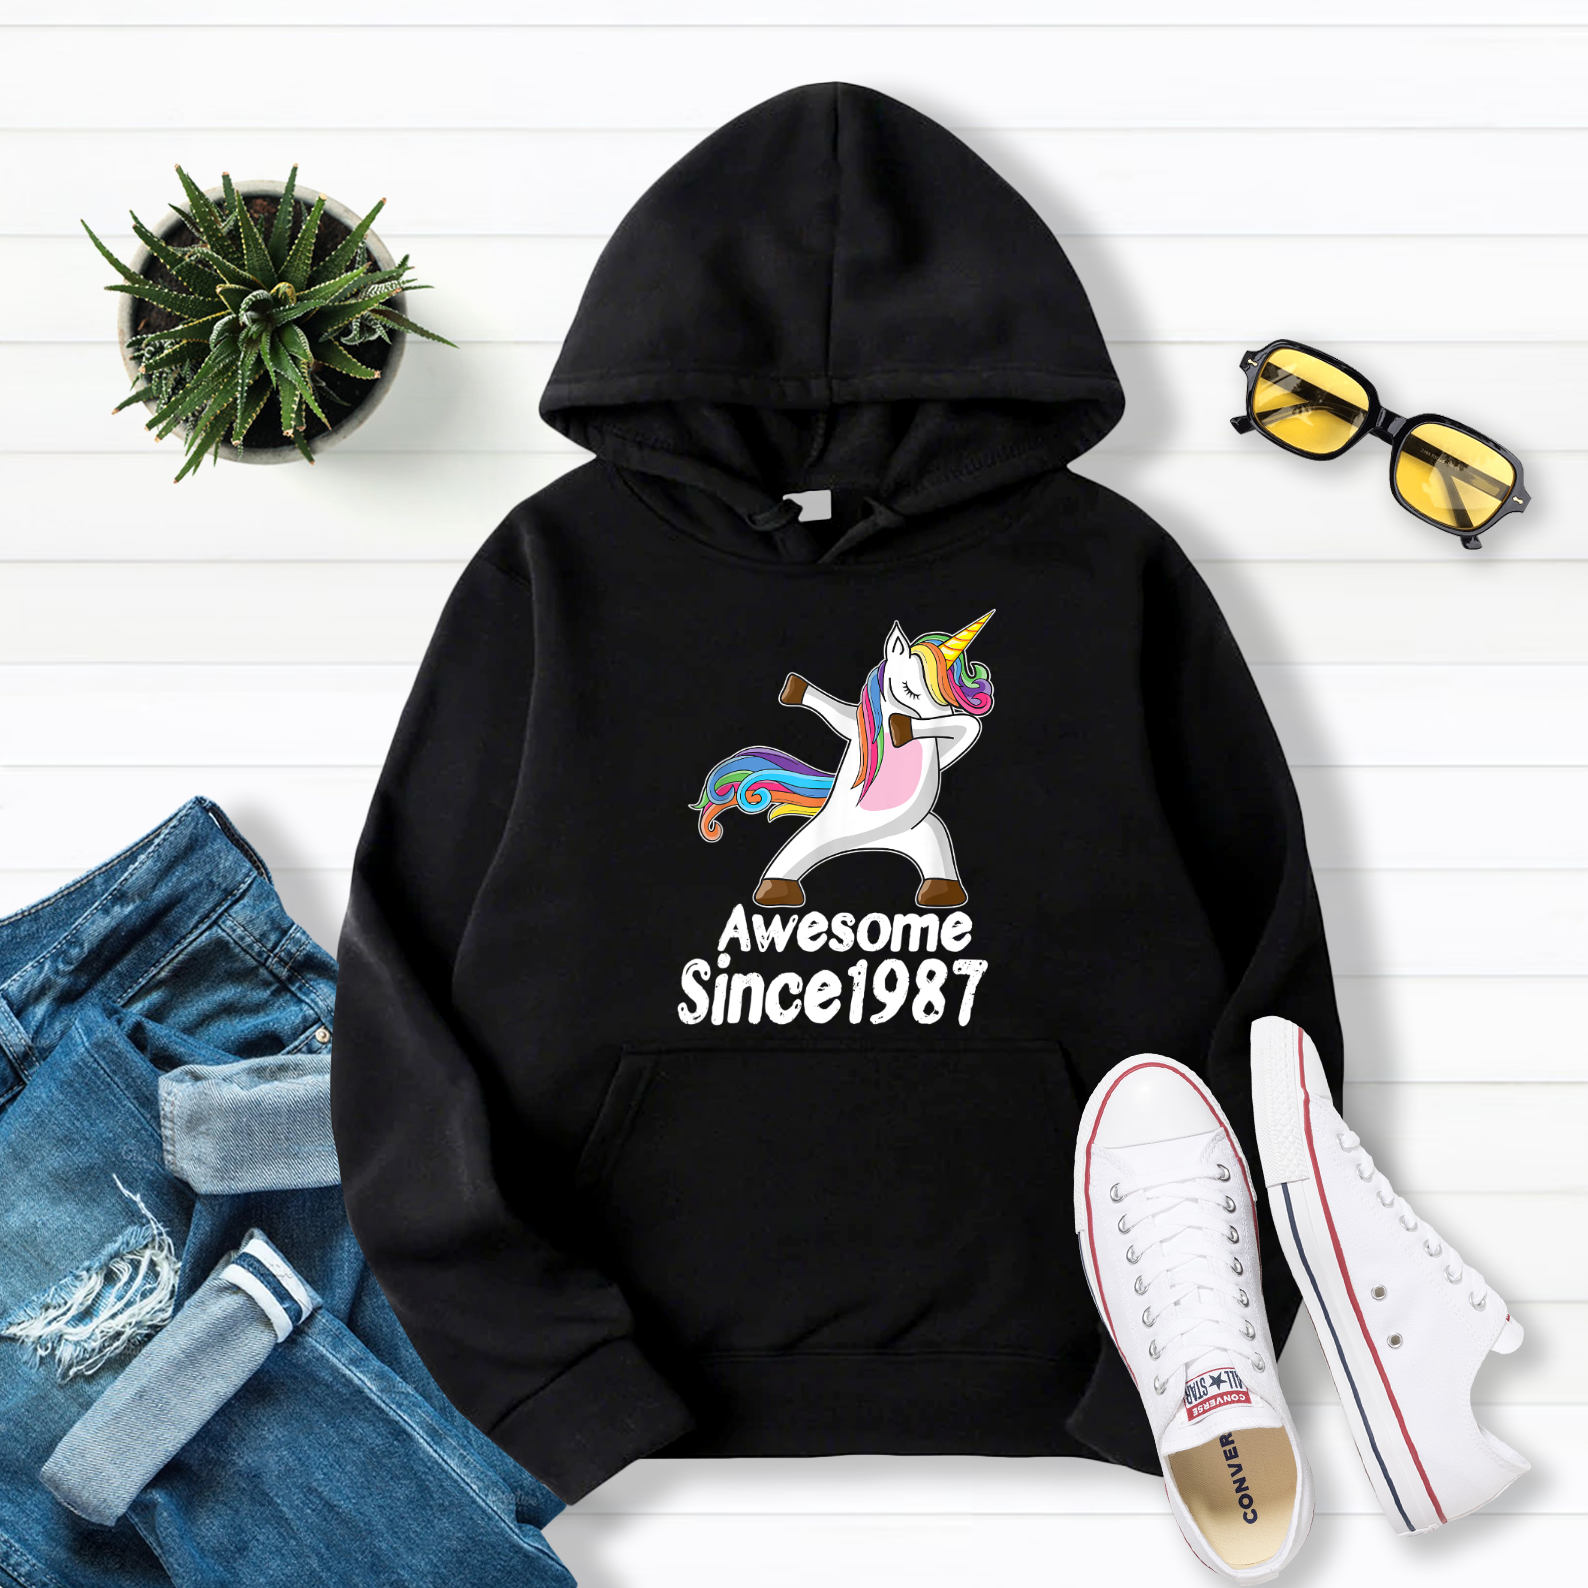 32nd Birthday Gift Awesome Since 1987 Unicorn Dabbing Pullover Hoodie Black S-5XL